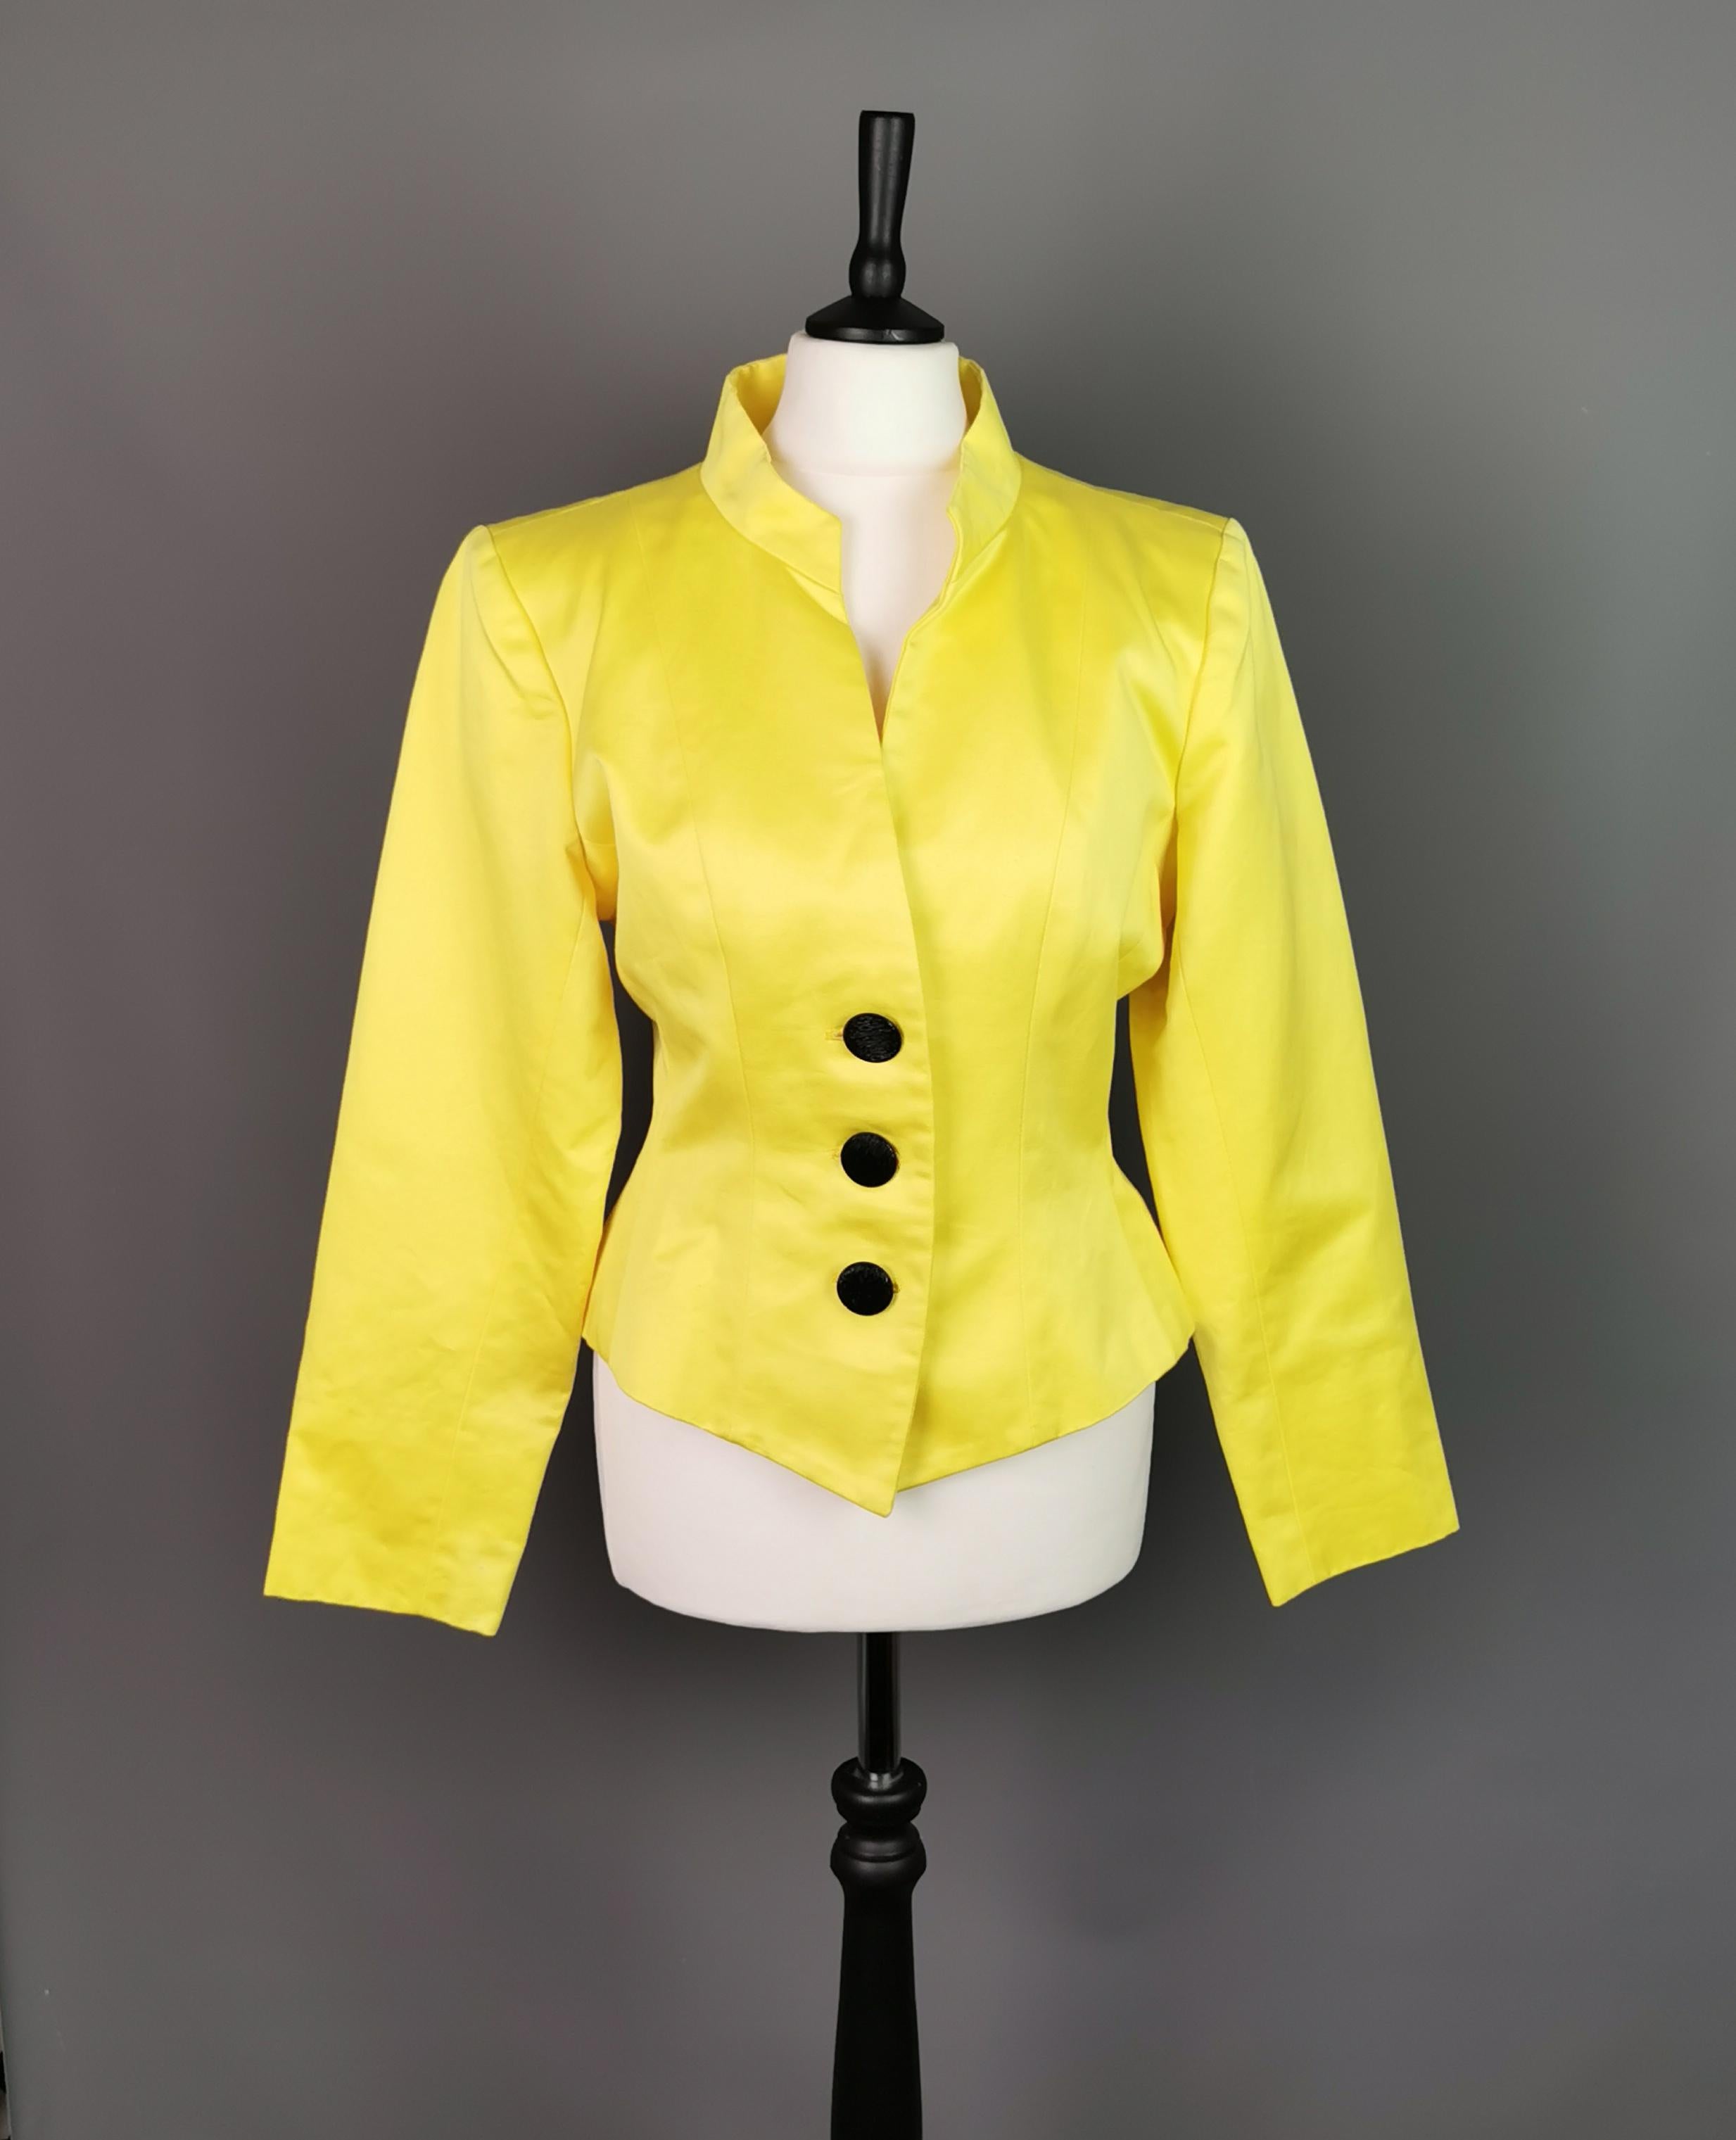 A truly stunning vintage 1980s Yves Saint Laurent rive gauche yellow blazer.

It is a peplum waist blazer, very figure flattering with gorgeous contrast black textured plastic buttons.

It has a mandarin style colour and boxy shoulders, a real